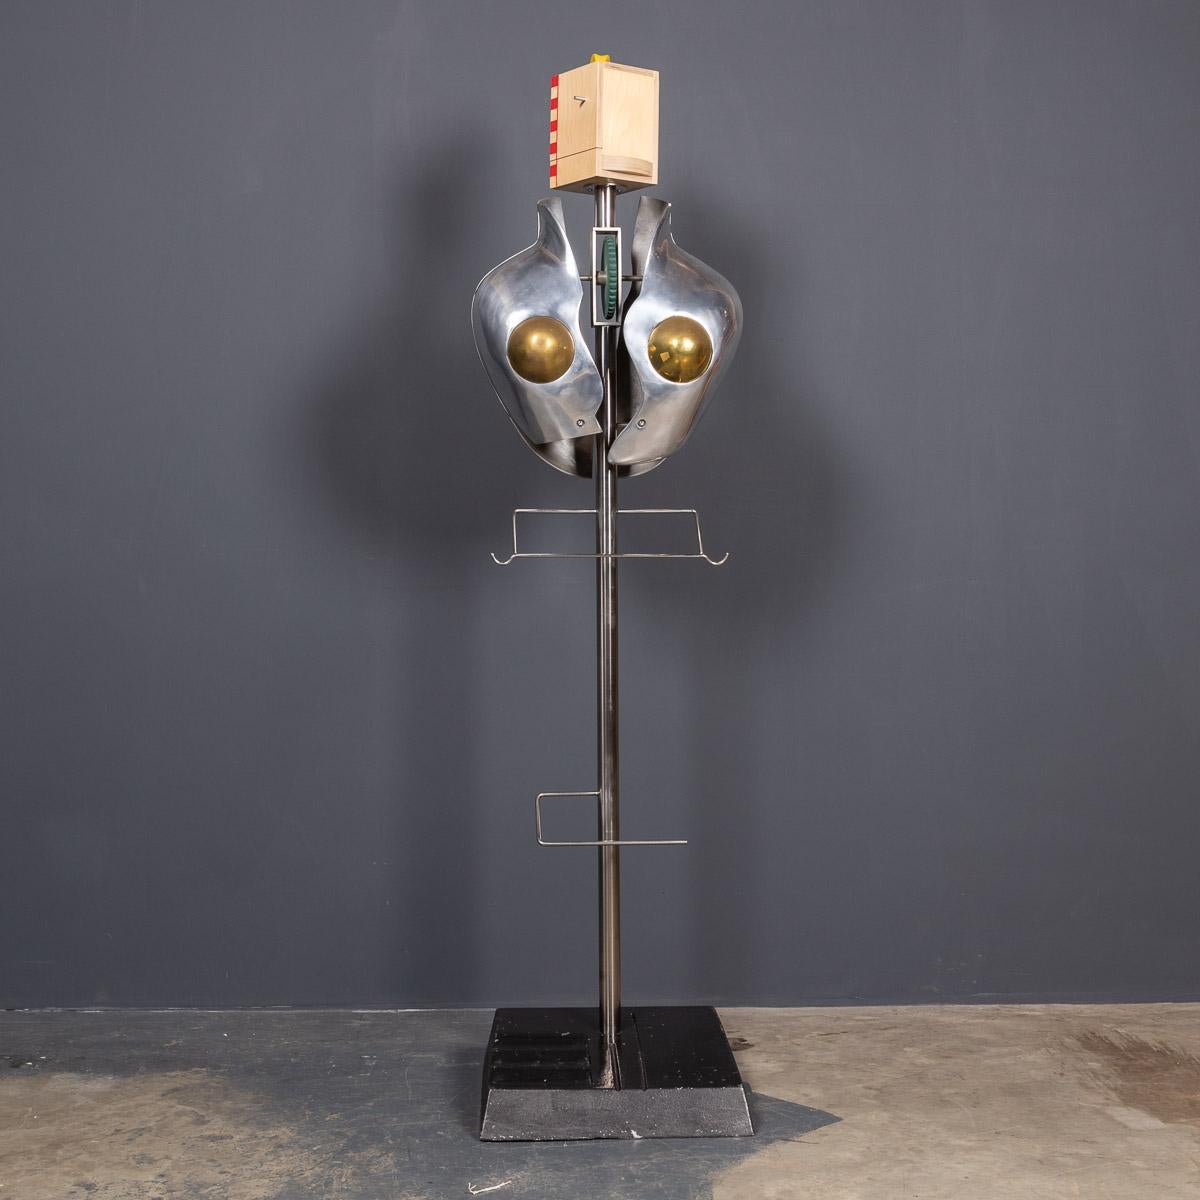 This quirky valet is from the iconic 80's, it has a polished metal torso with brass details, the style echos of a 